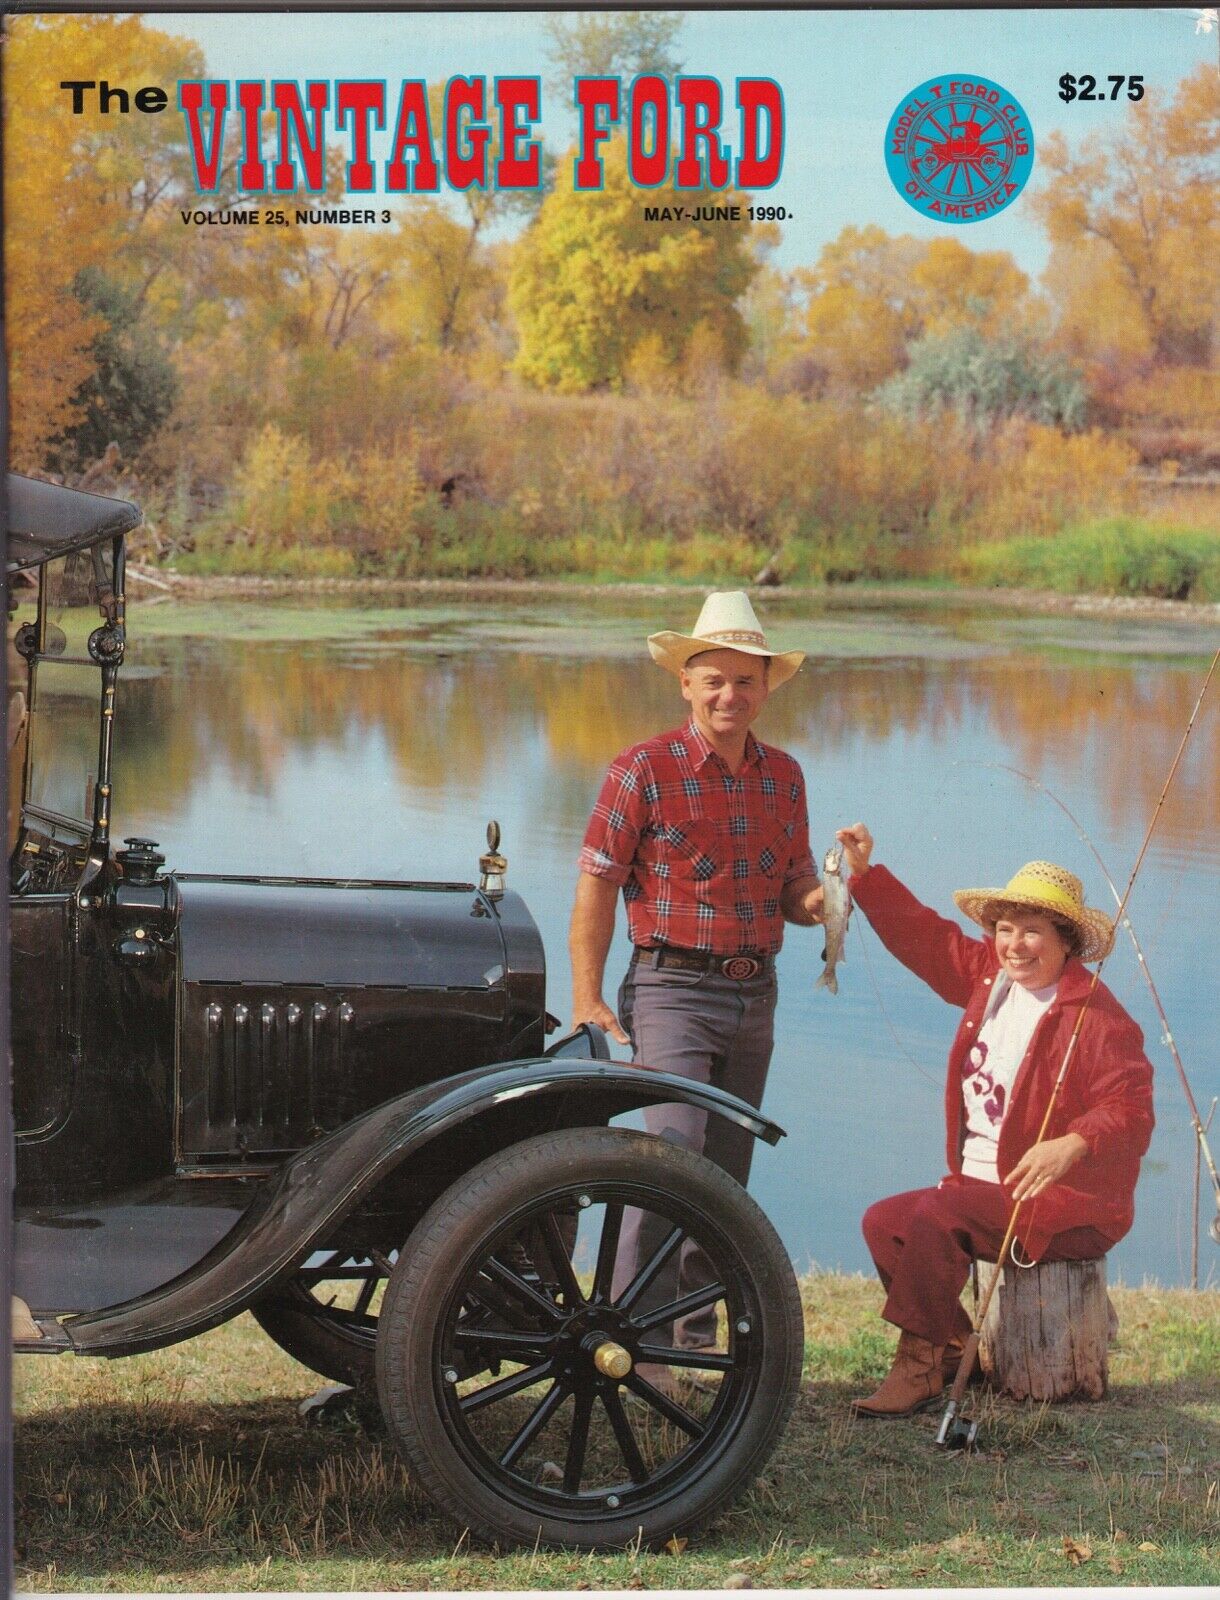 1921 RUNABOUT - THE VINTAGE FORD VINTAGE MAGAZINE - SNAKE RIVER, IDAHO USA